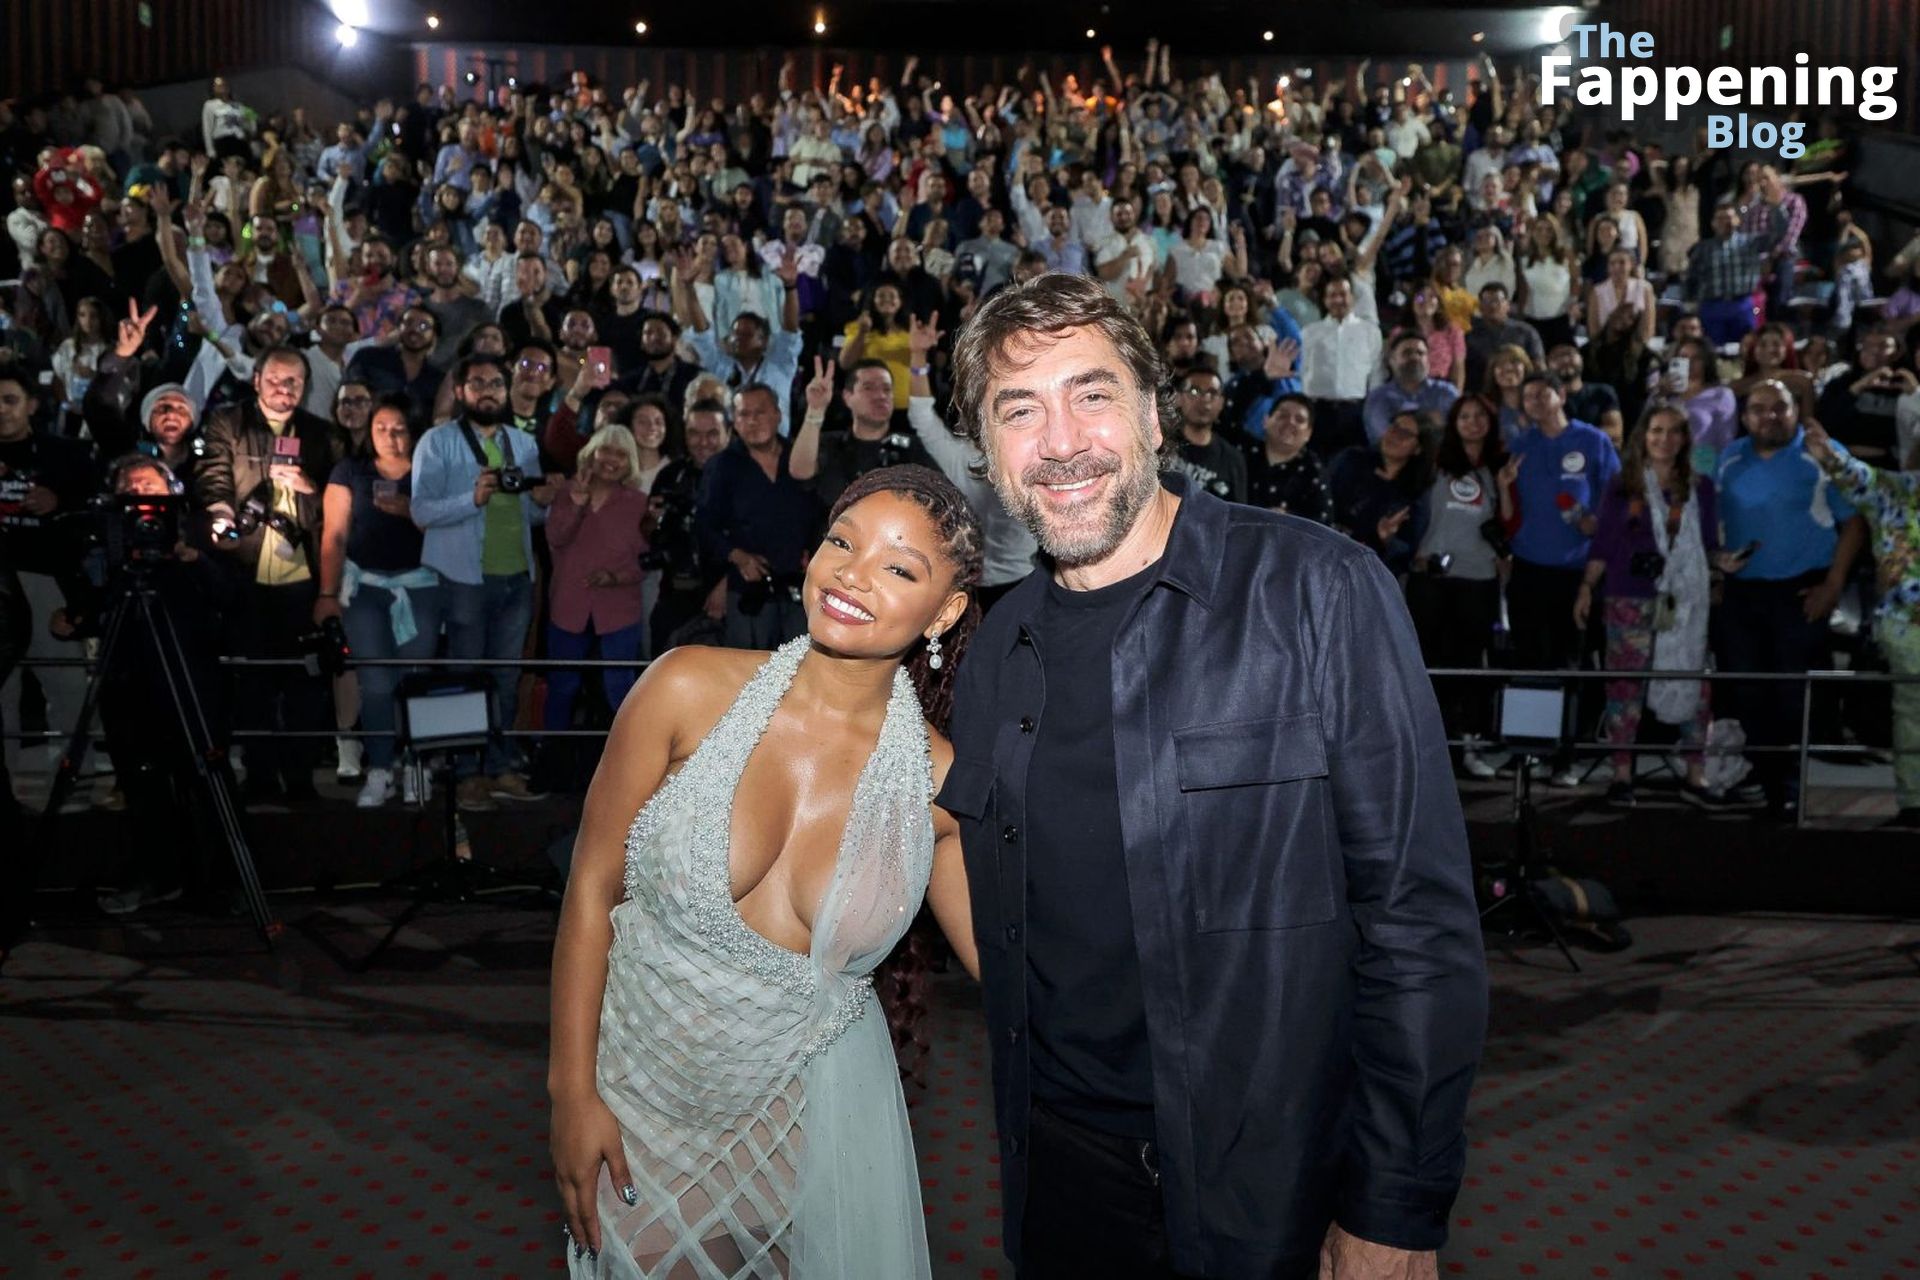 Halle Bailey Displays Her Sexy Boobs the Red Carpet of “The Little Mermaid” in Mexico City (62 Photos)